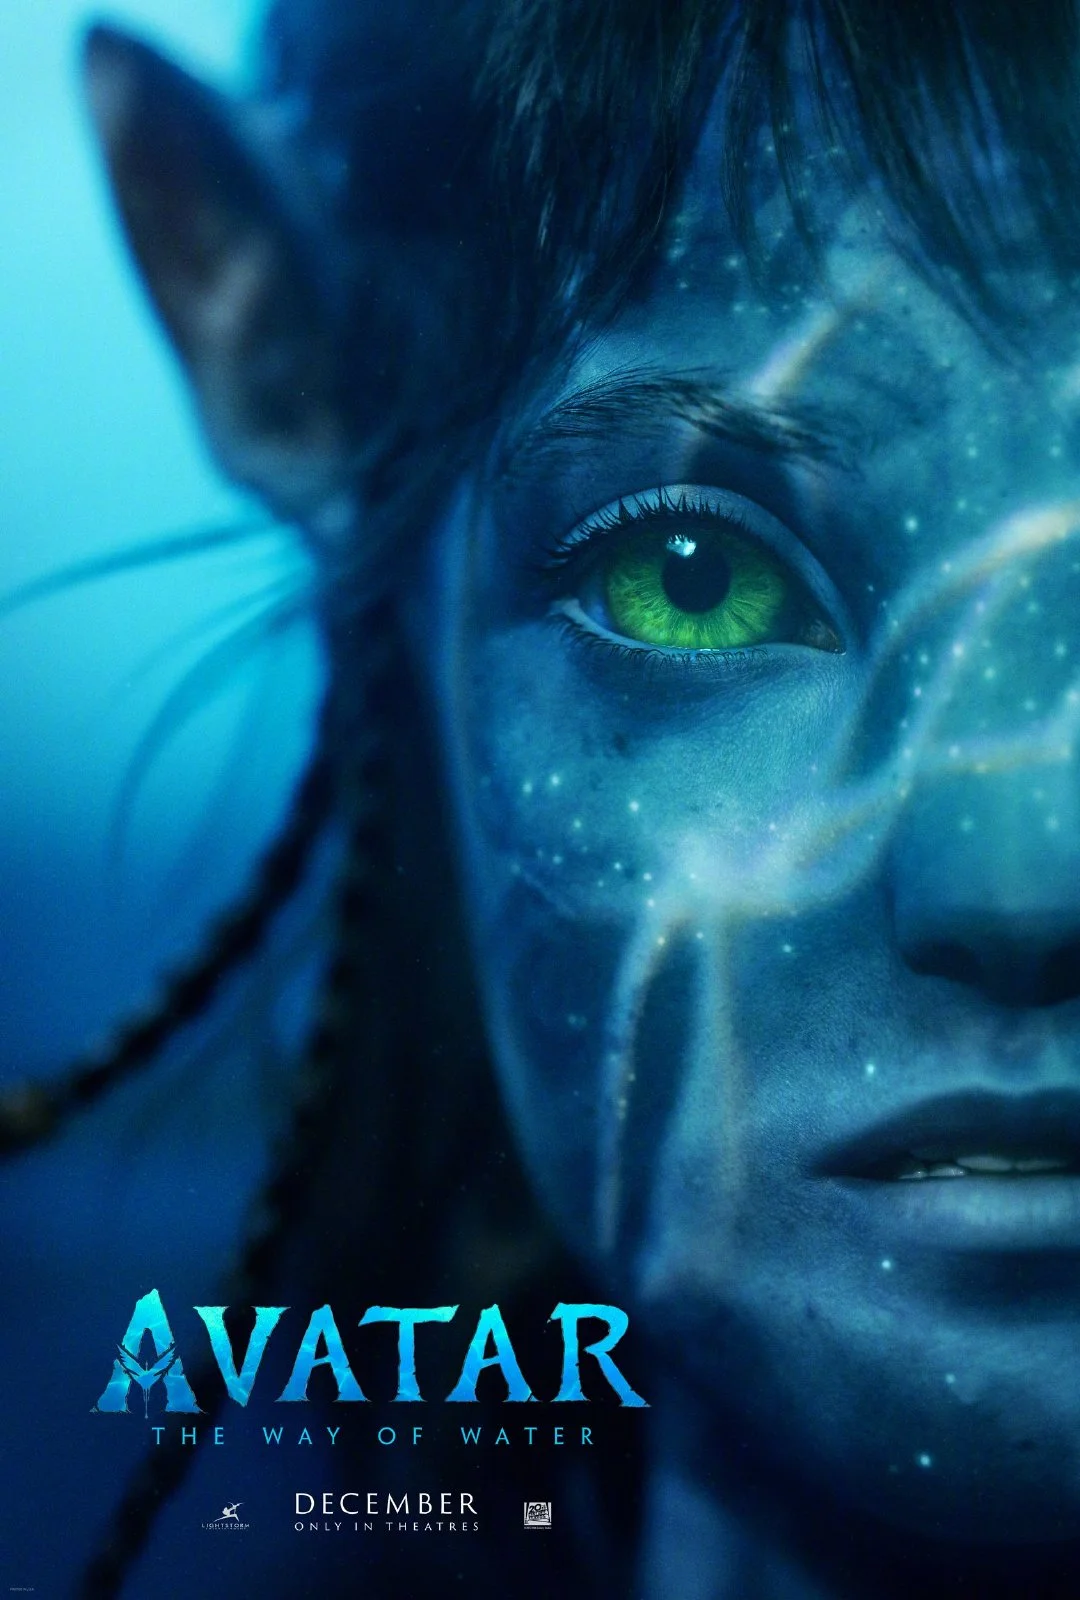 "Avatar: The Way of Water" Official Trailer and Poster Released!